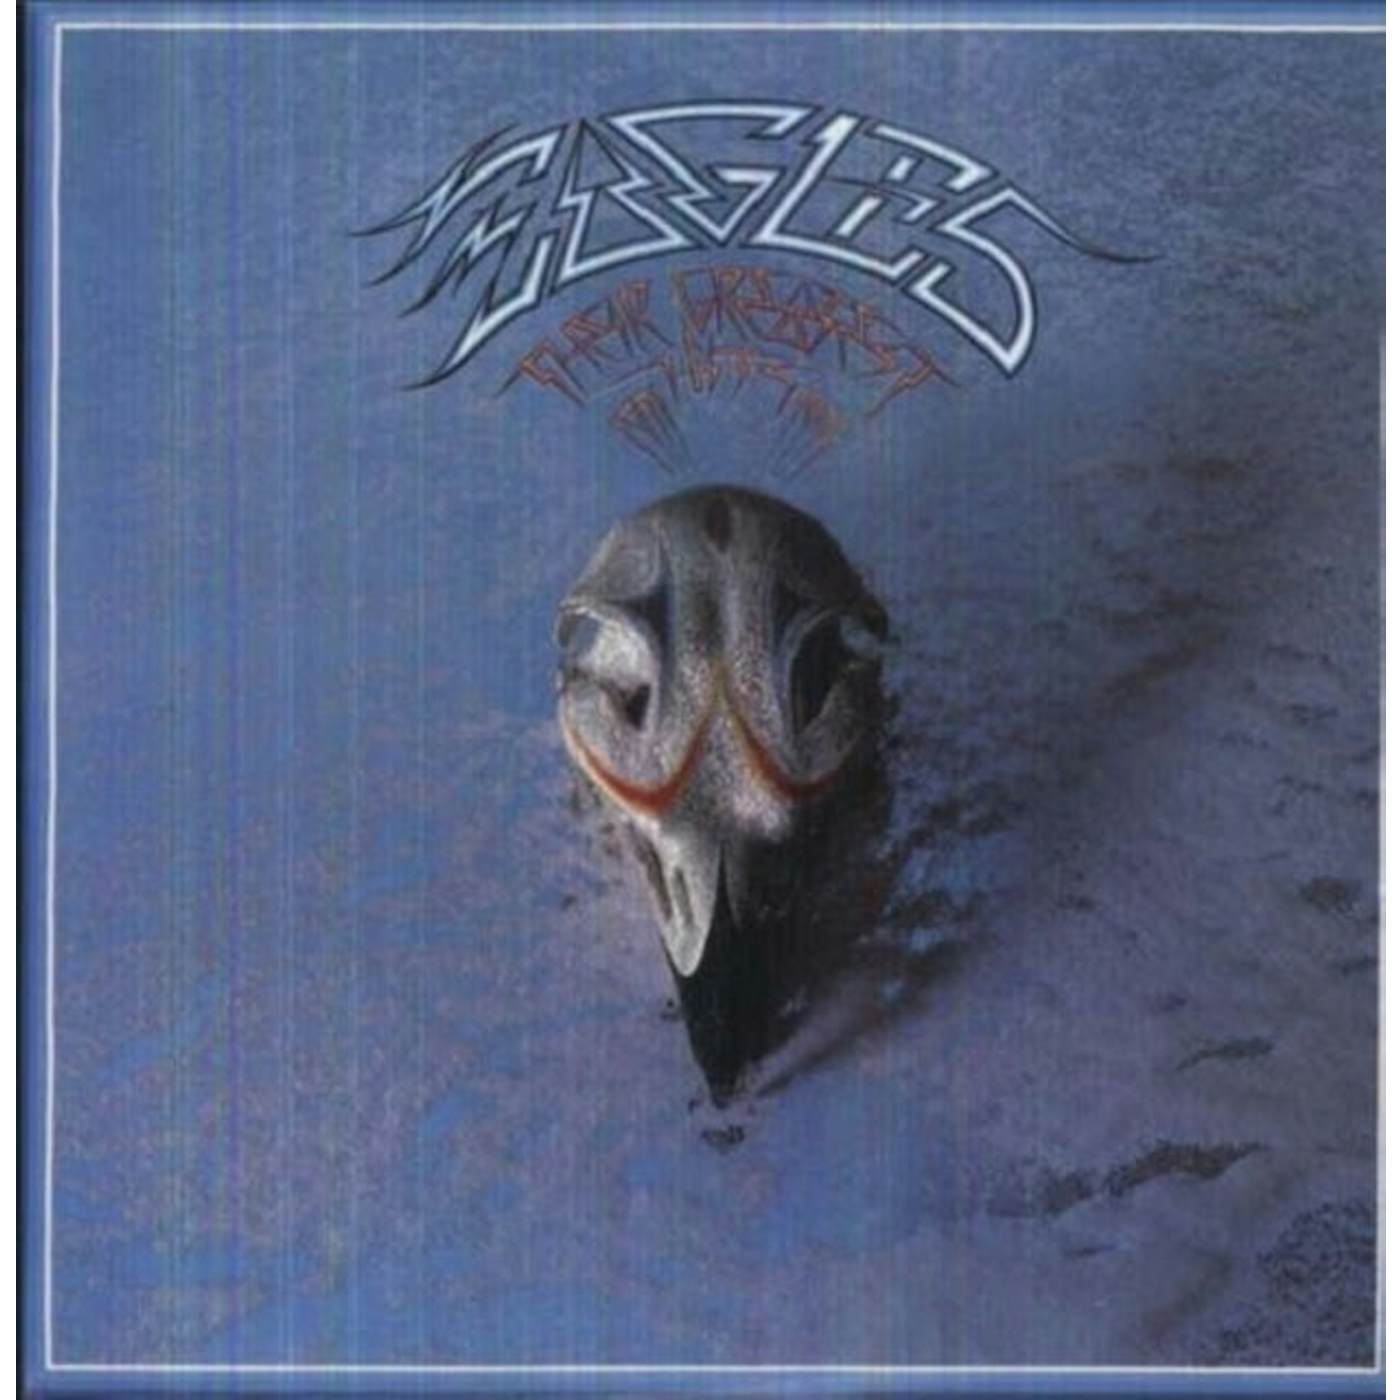 Eagles LP Vinyl Record - Their Greatest Hits 19 71-75